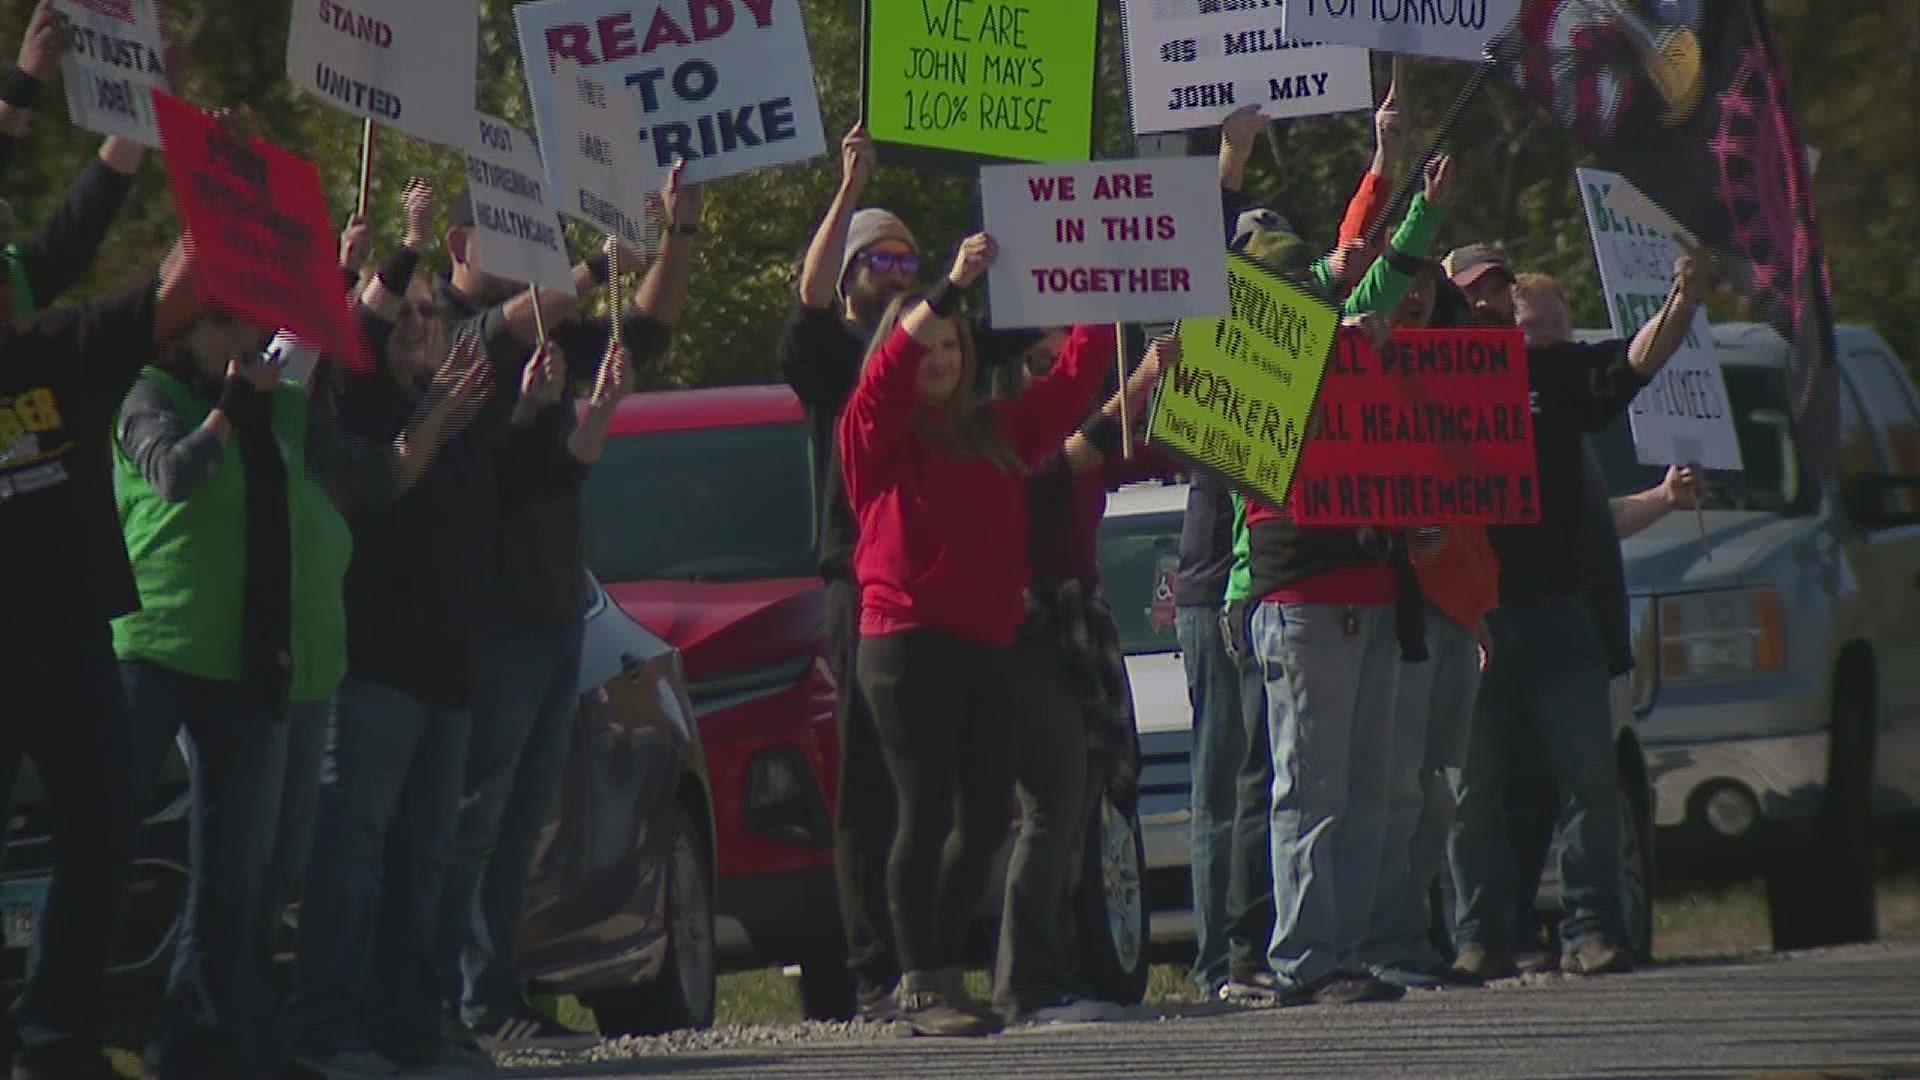 Employees from all 8 Iowa and Illinois Deere facilities attended. The organizer tells News 8 the event shows solidarity to both Deere and UAW leaders.